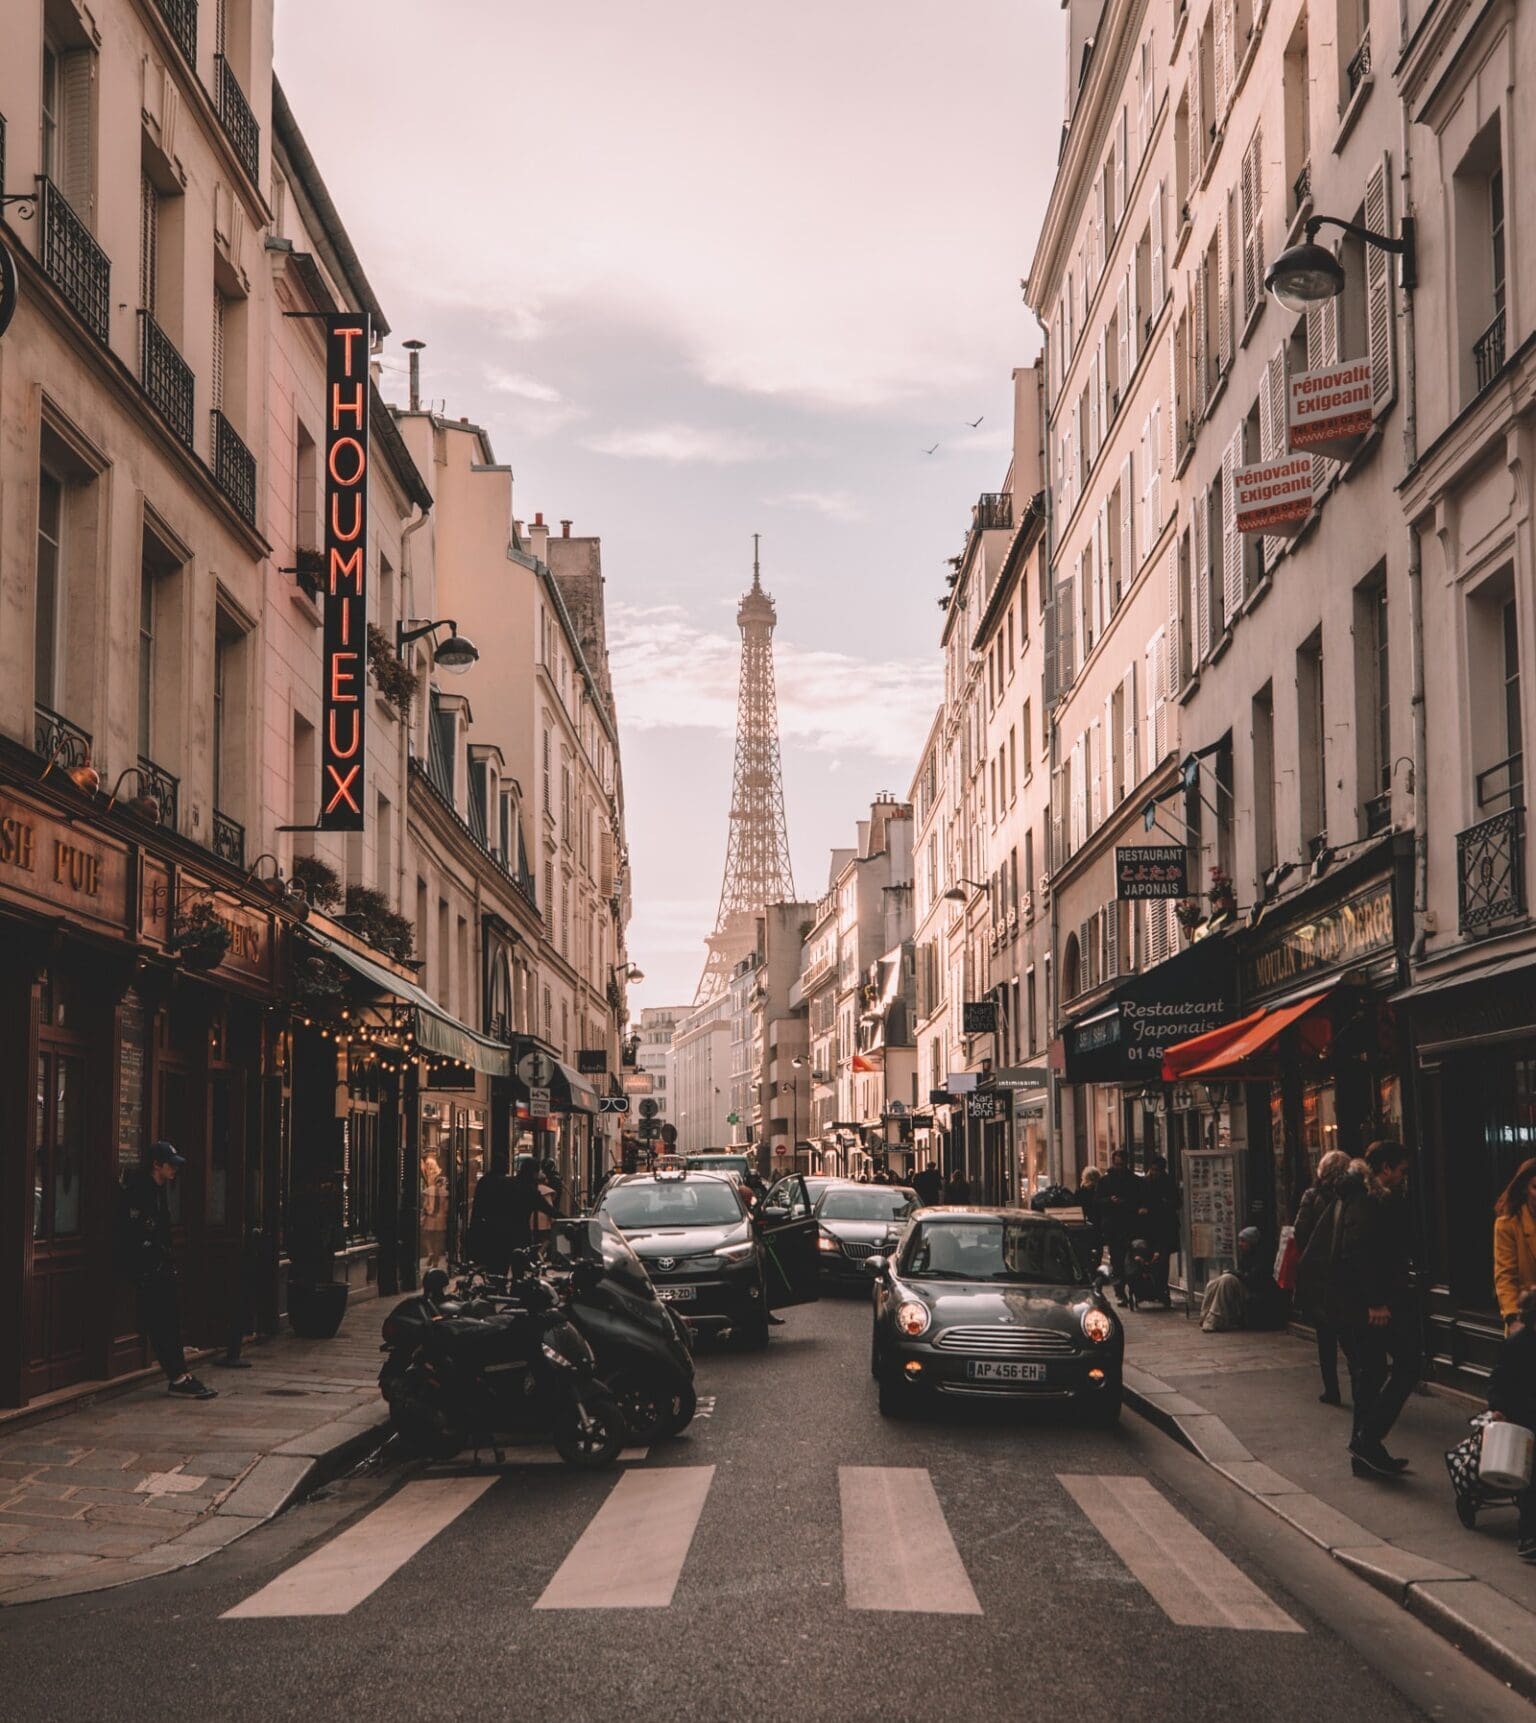 Cultural tours for the modern era | The eiffel tower is visible behind the facade of a Parisian street